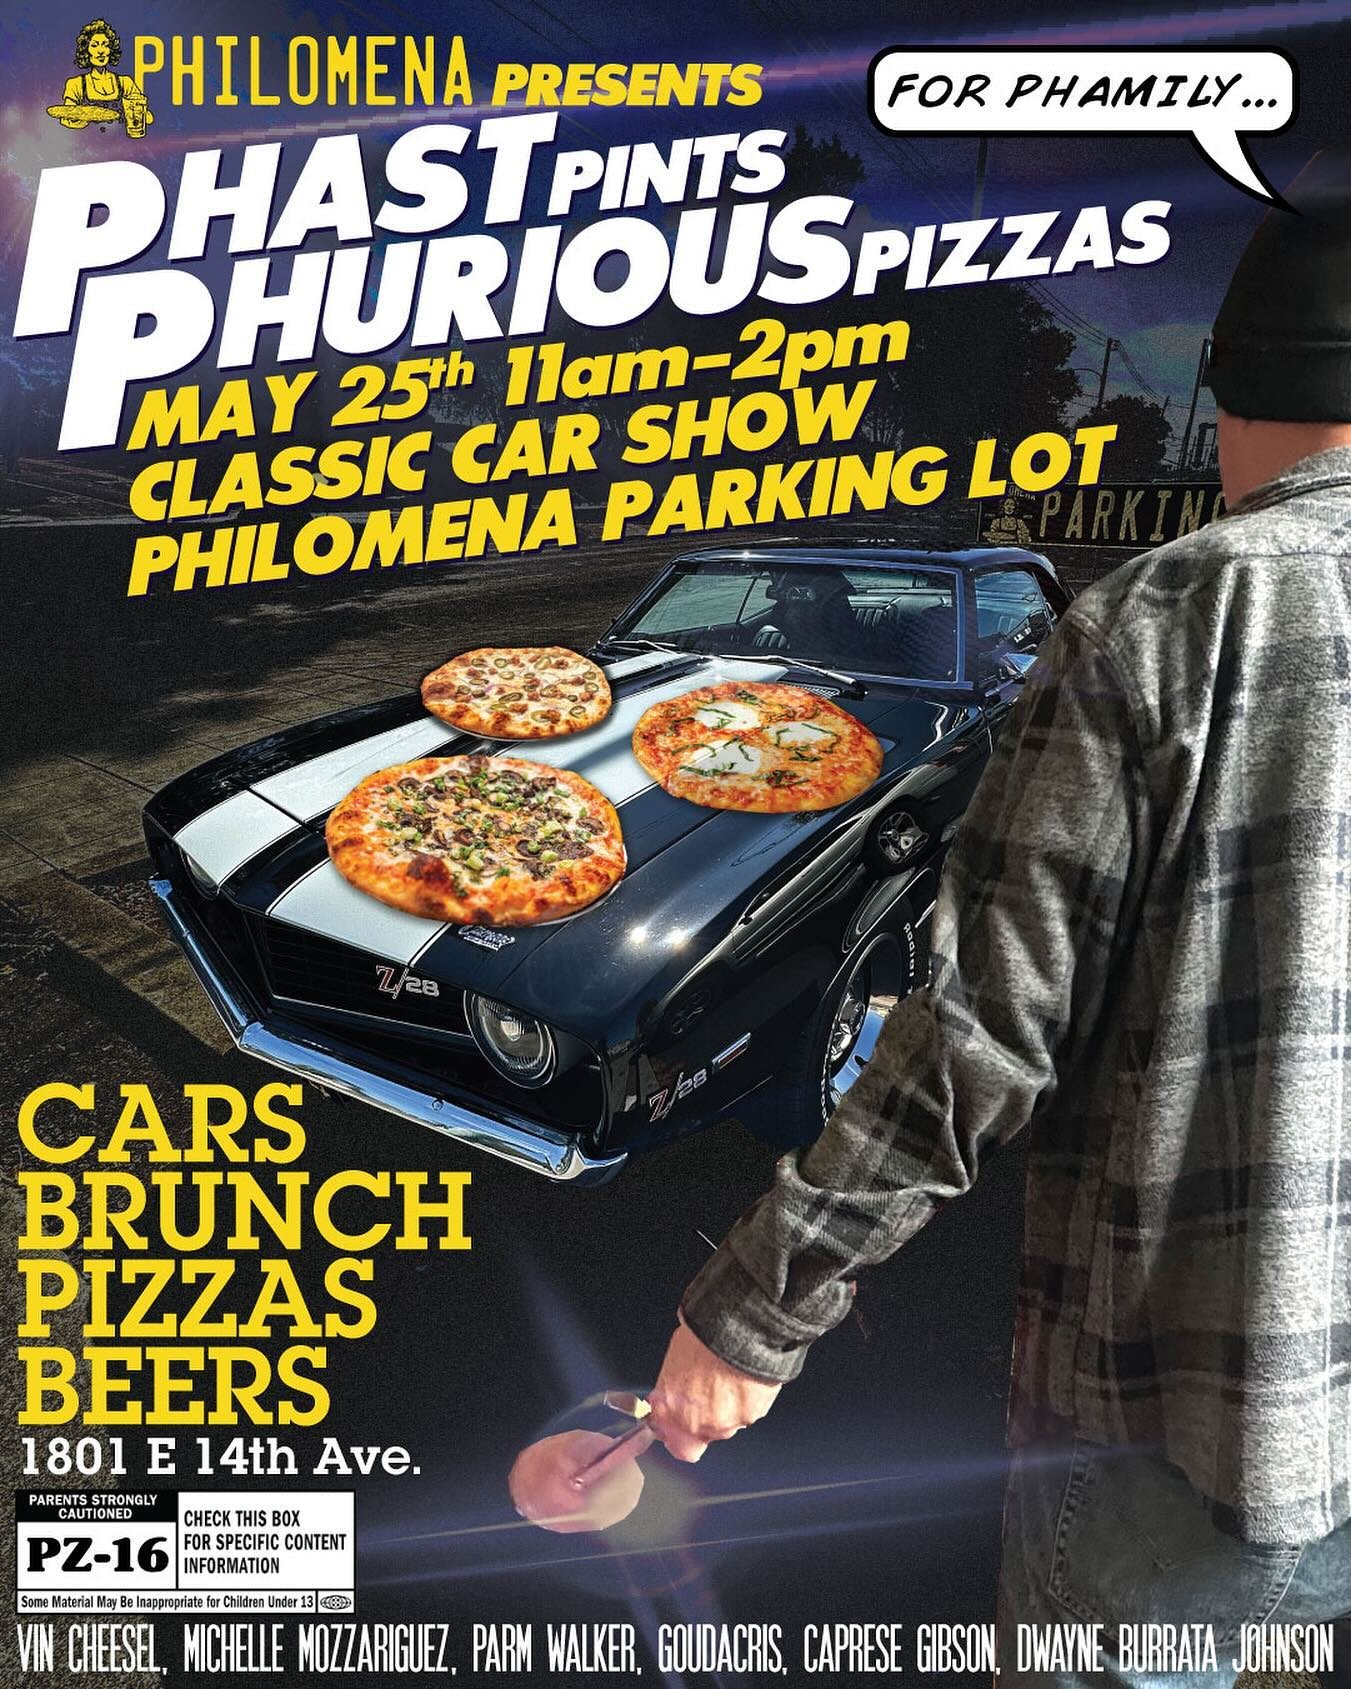 For the Phamily: Phast Pints, Phurious Pizzas! Join us for classic cars, brunch, pizza &amp; beers Saturday May 25 11am-2pm.